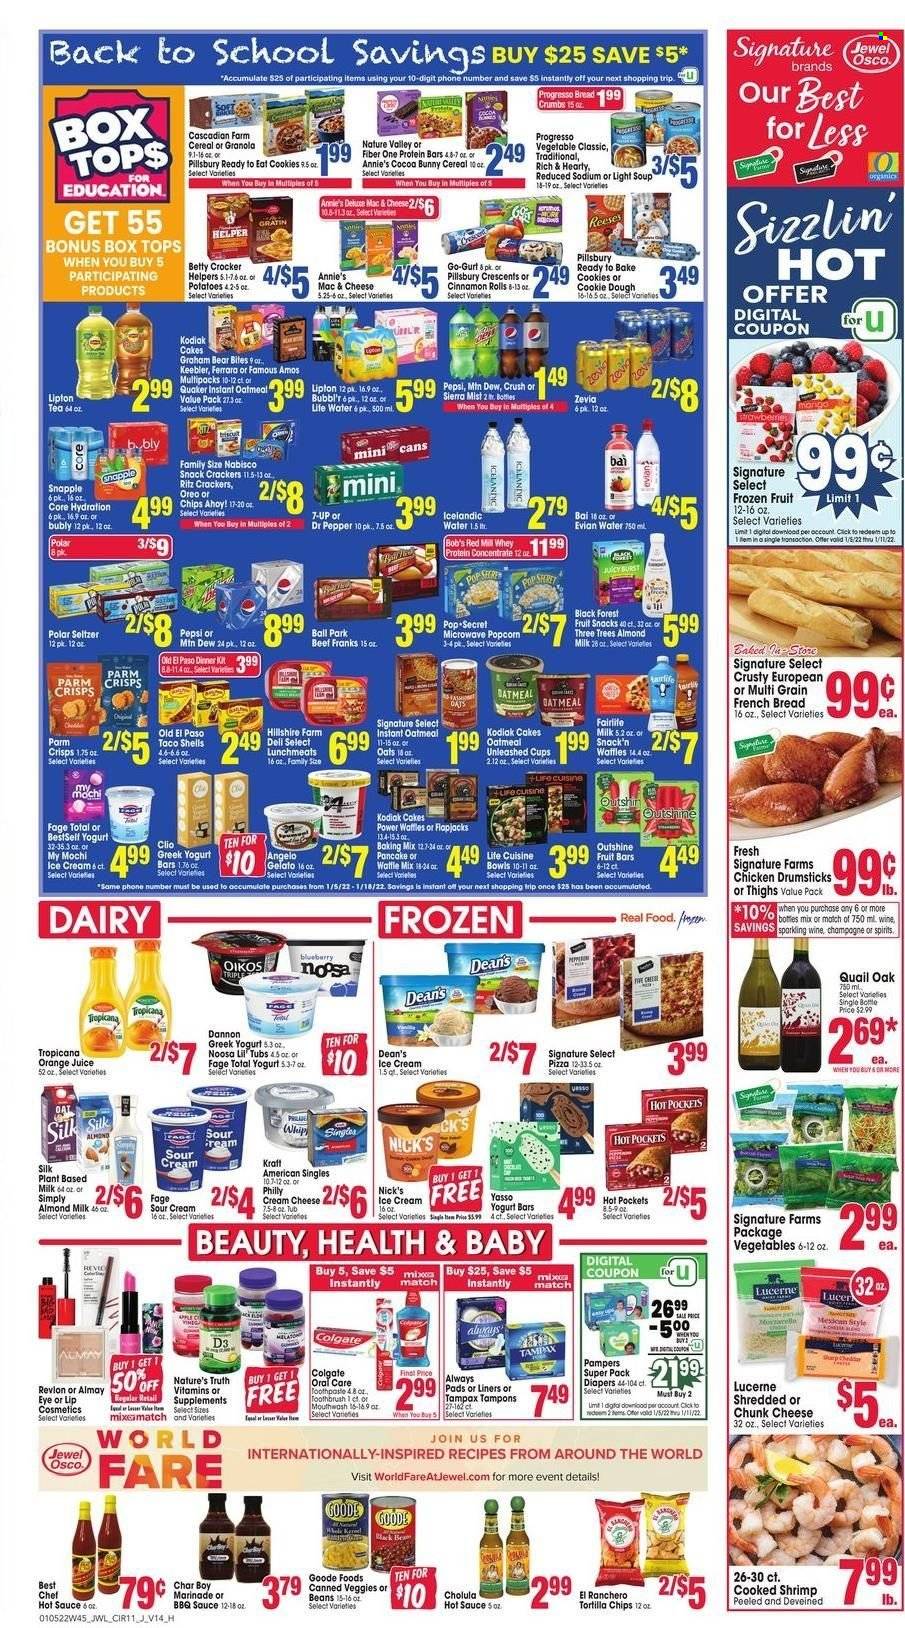 thumbnail - Jewel Osco Flyer - 01/05/2022 - 01/11/2022 - Sales products - bread, cake, pie, Old El Paso, french bread, cinnamon roll, beans, potatoes, shrimps, hot pocket, pizza, soup, sauce, pancakes, Pillsbury, Quaker, Progresso, Annie's, Kraft®, ham, Hillshire Farm, lunch meat, Kraft Singles, chunk cheese, greek yoghurt, Oikos, Dannon, almond milk, sour cream, ice cream, Nick's Ice Cream, gelato, cookies, crackers, fruit snack, Chips Ahoy!, Keebler, RITZ, tortilla chips, popcorn, cocoa, oatmeal, oats, cereals, granola, protein bar, Nature Valley, Fiber One, BBQ sauce, hot sauce, marinade, Mountain Dew, Pepsi, orange juice, juice, Lipton, 7UP, Snapple, Sierra Mist, Bai, seltzer water, Evian, tea, champagne, Quail Oak, chicken drumsticks, Pampers, nappies, Colgate, toothbrush, mouthwash, Tampax, sanitary pads, tampons, Almay, Revlon, Cream Silk, cup, Nature's Truth, vitamin D3. Page 11.